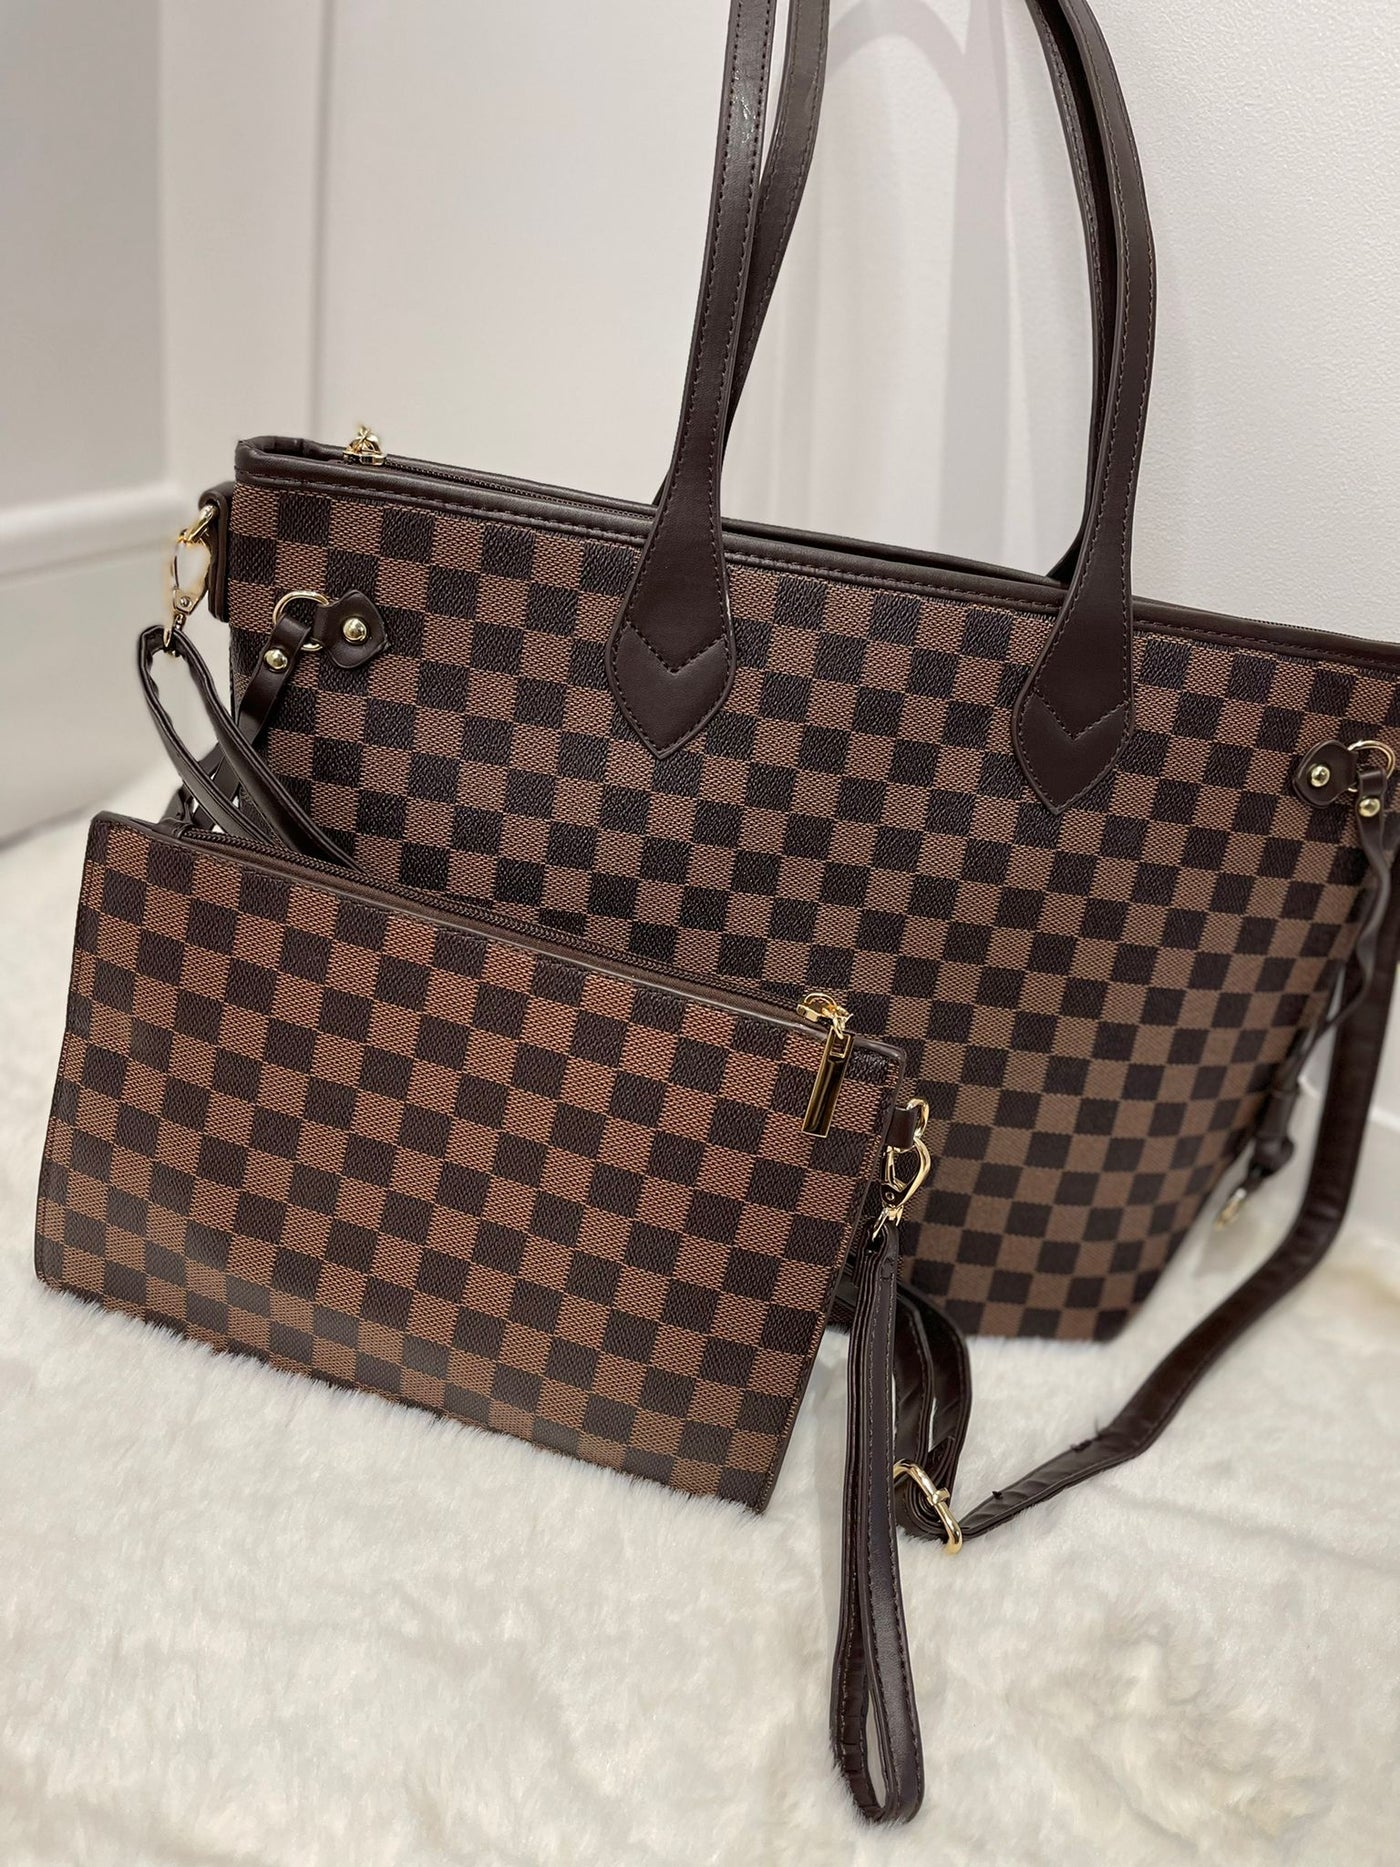 Brown check shoulder bag and a small clutch